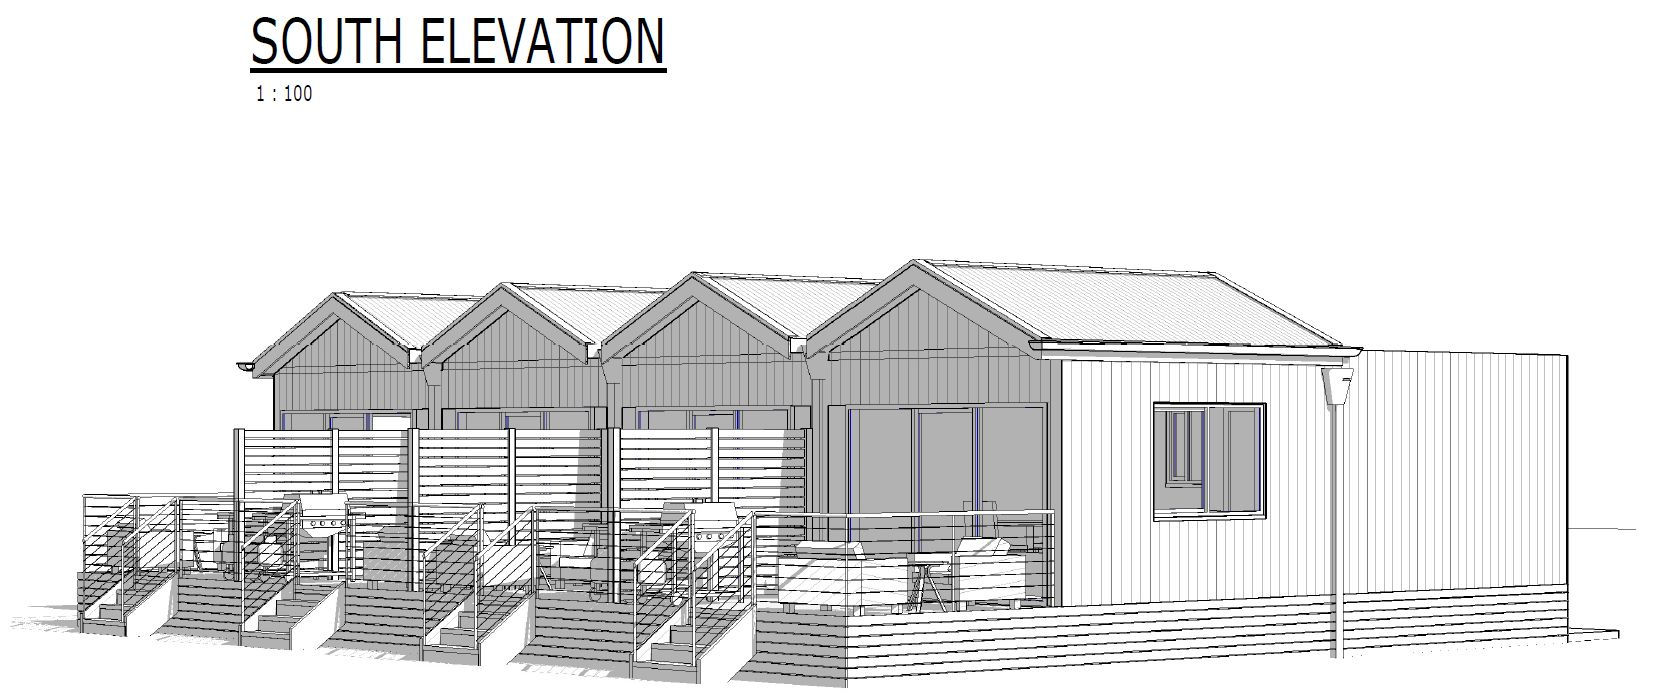 Perspective drawing of the new cabins